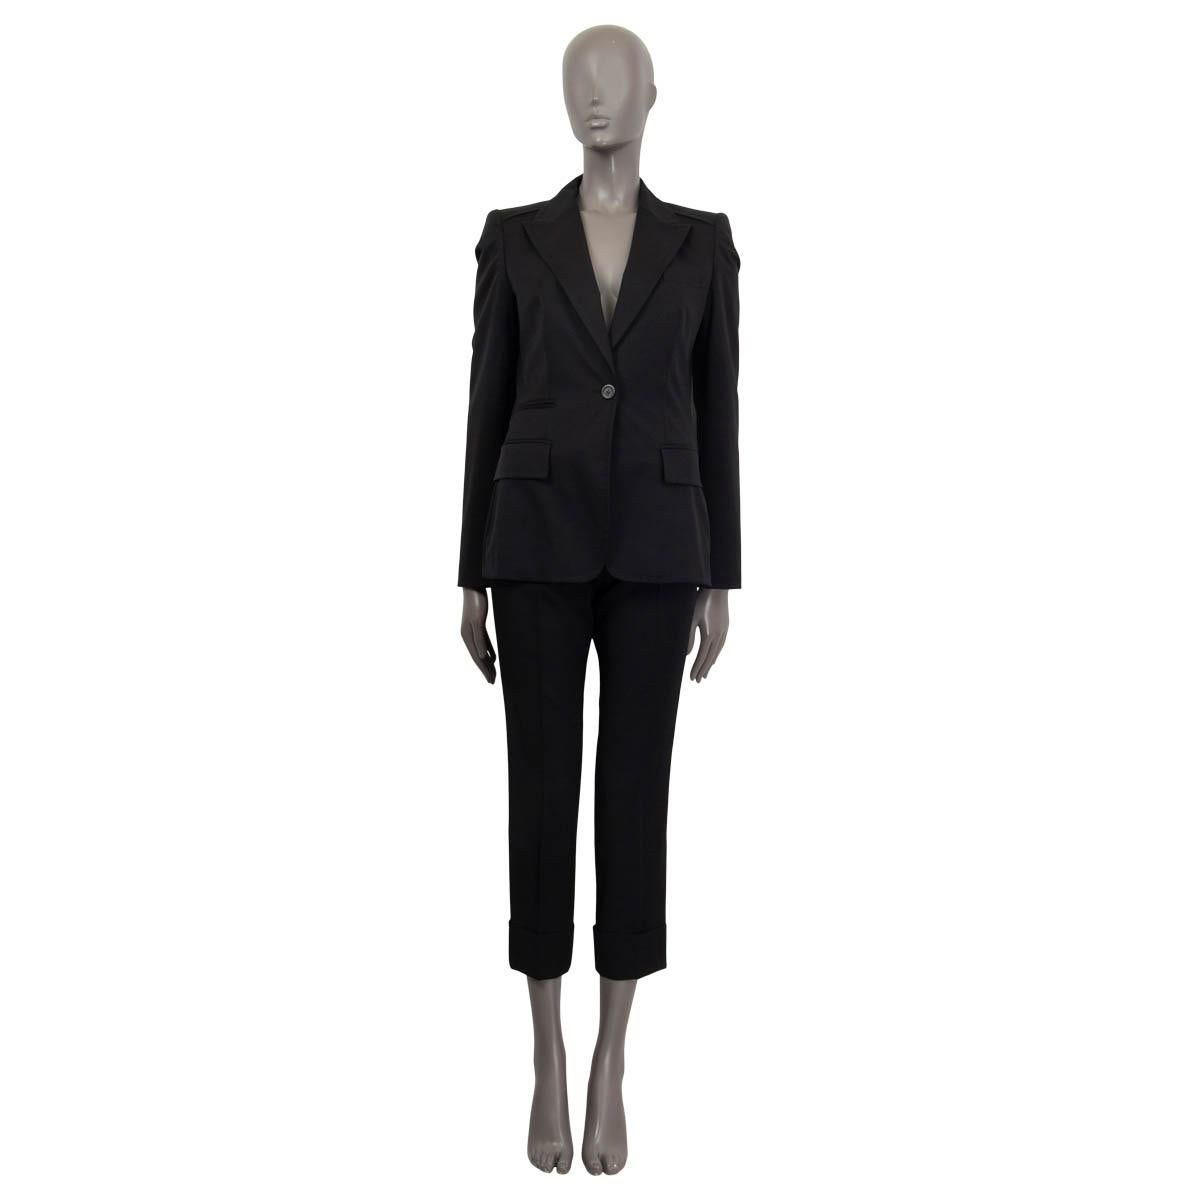 100% authentic Gucci classic blazer in black cotton (assumed cause tag is missing). Features padded shoulders, two flap pockets, one slit pocket and a notch collar. Opens with One button on the front. Lined in black silk (assumed cause tag is